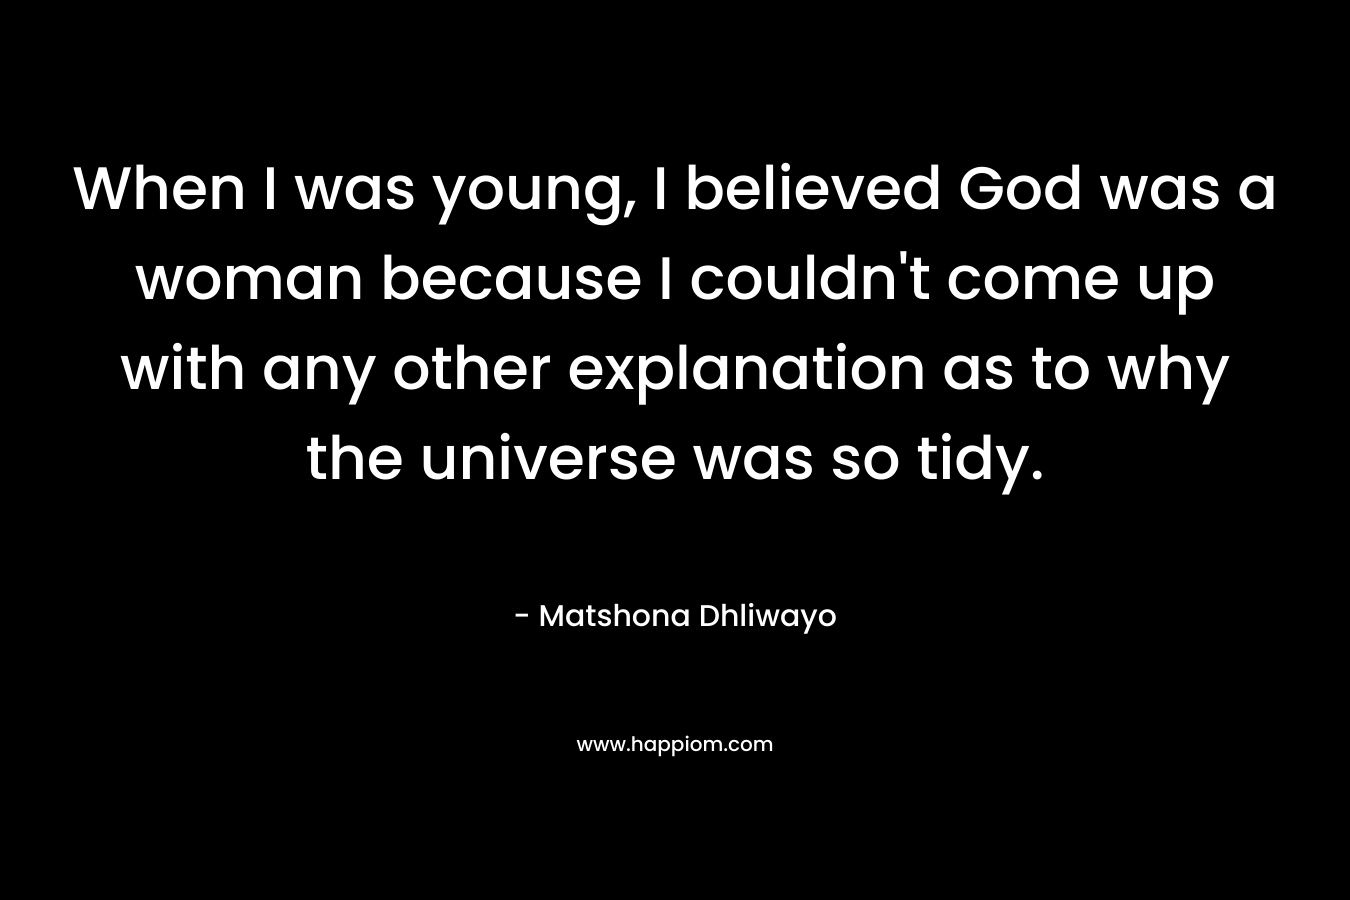 When I was young, I believed God was a woman because I couldn’t come up with any other explanation as to why the universe was so tidy. – Matshona Dhliwayo